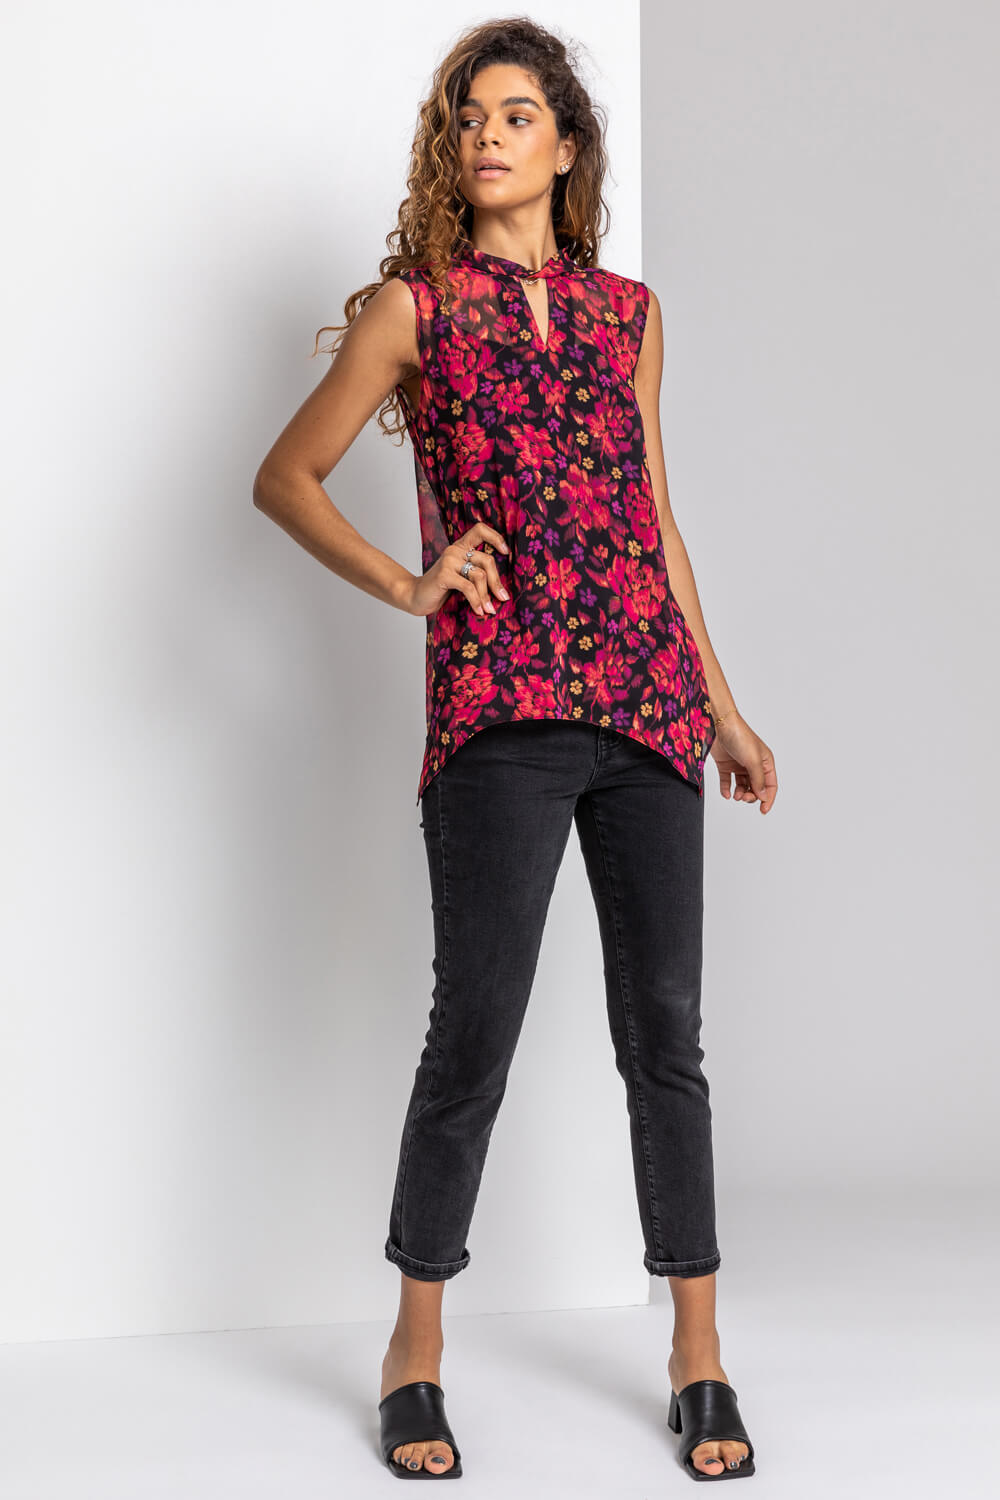 Red Floral Print Keyhole Top, Image 4 of 4